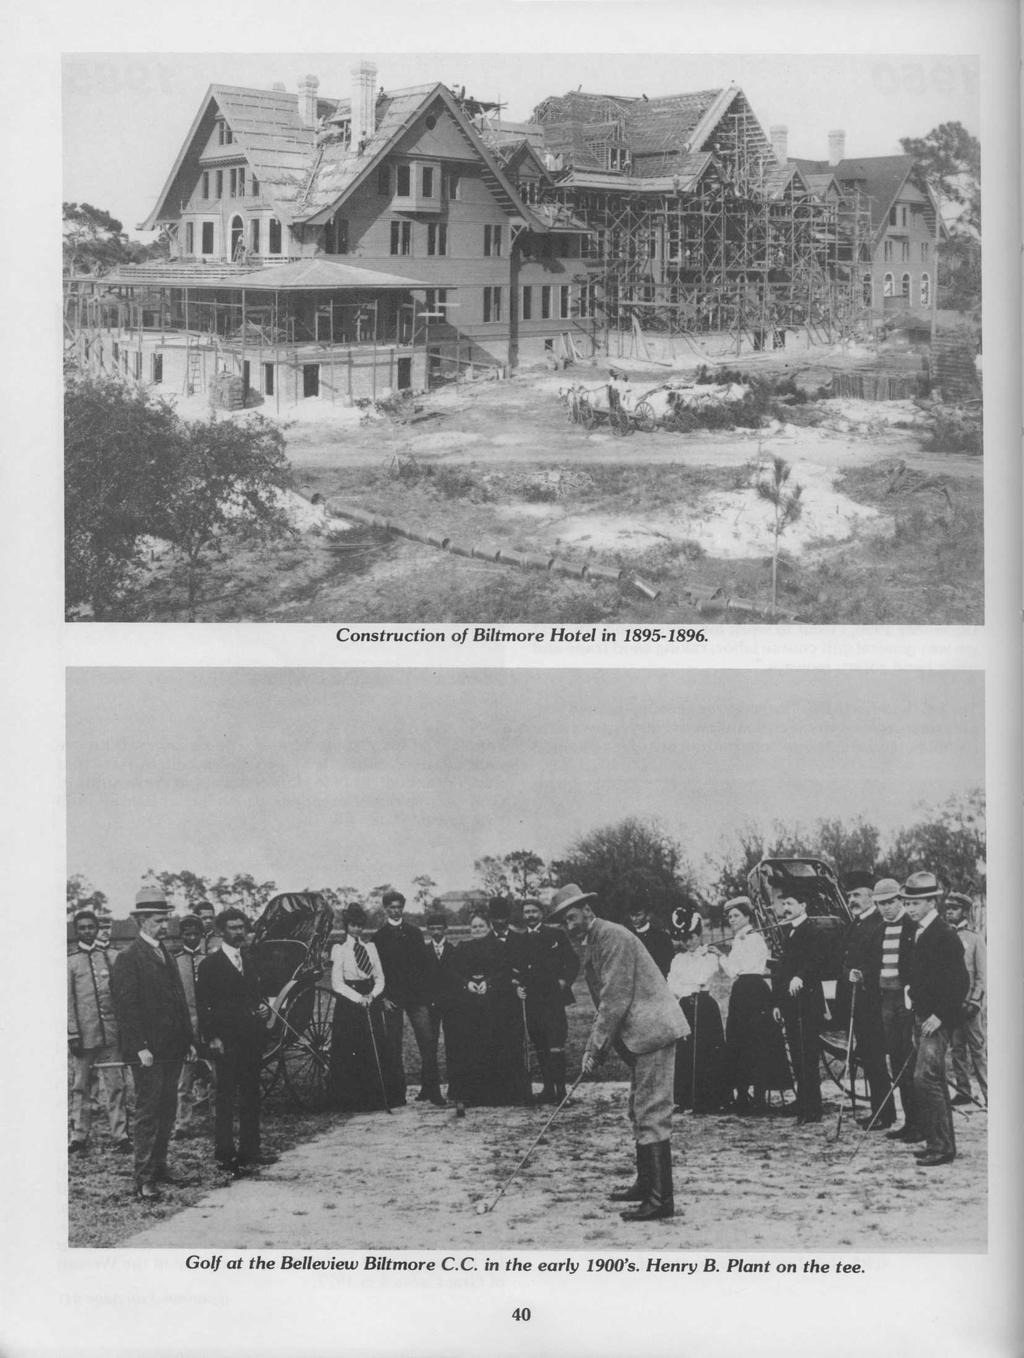 Construction of Biltmore Hotel in 1895-1896.